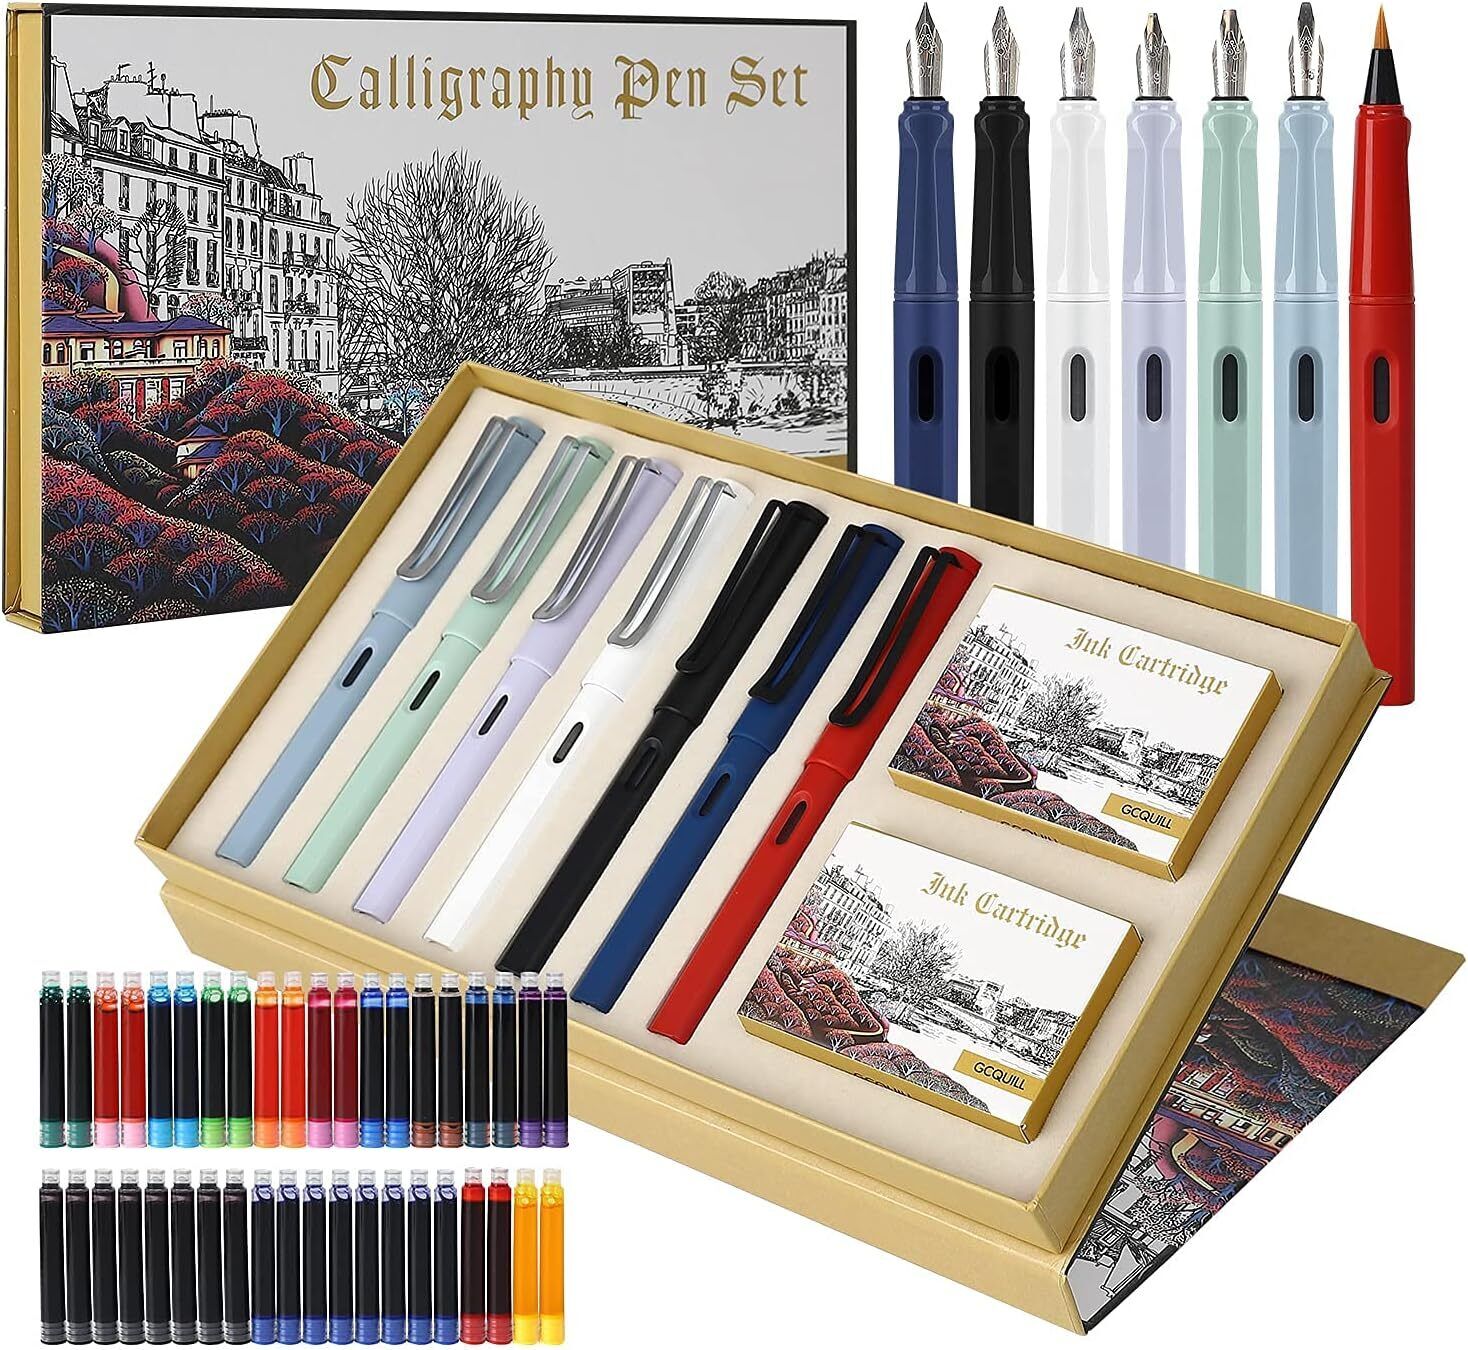 Calligraphy Pen Set, 7 Calligraphy Fountain Pens with Different Nibs and 40